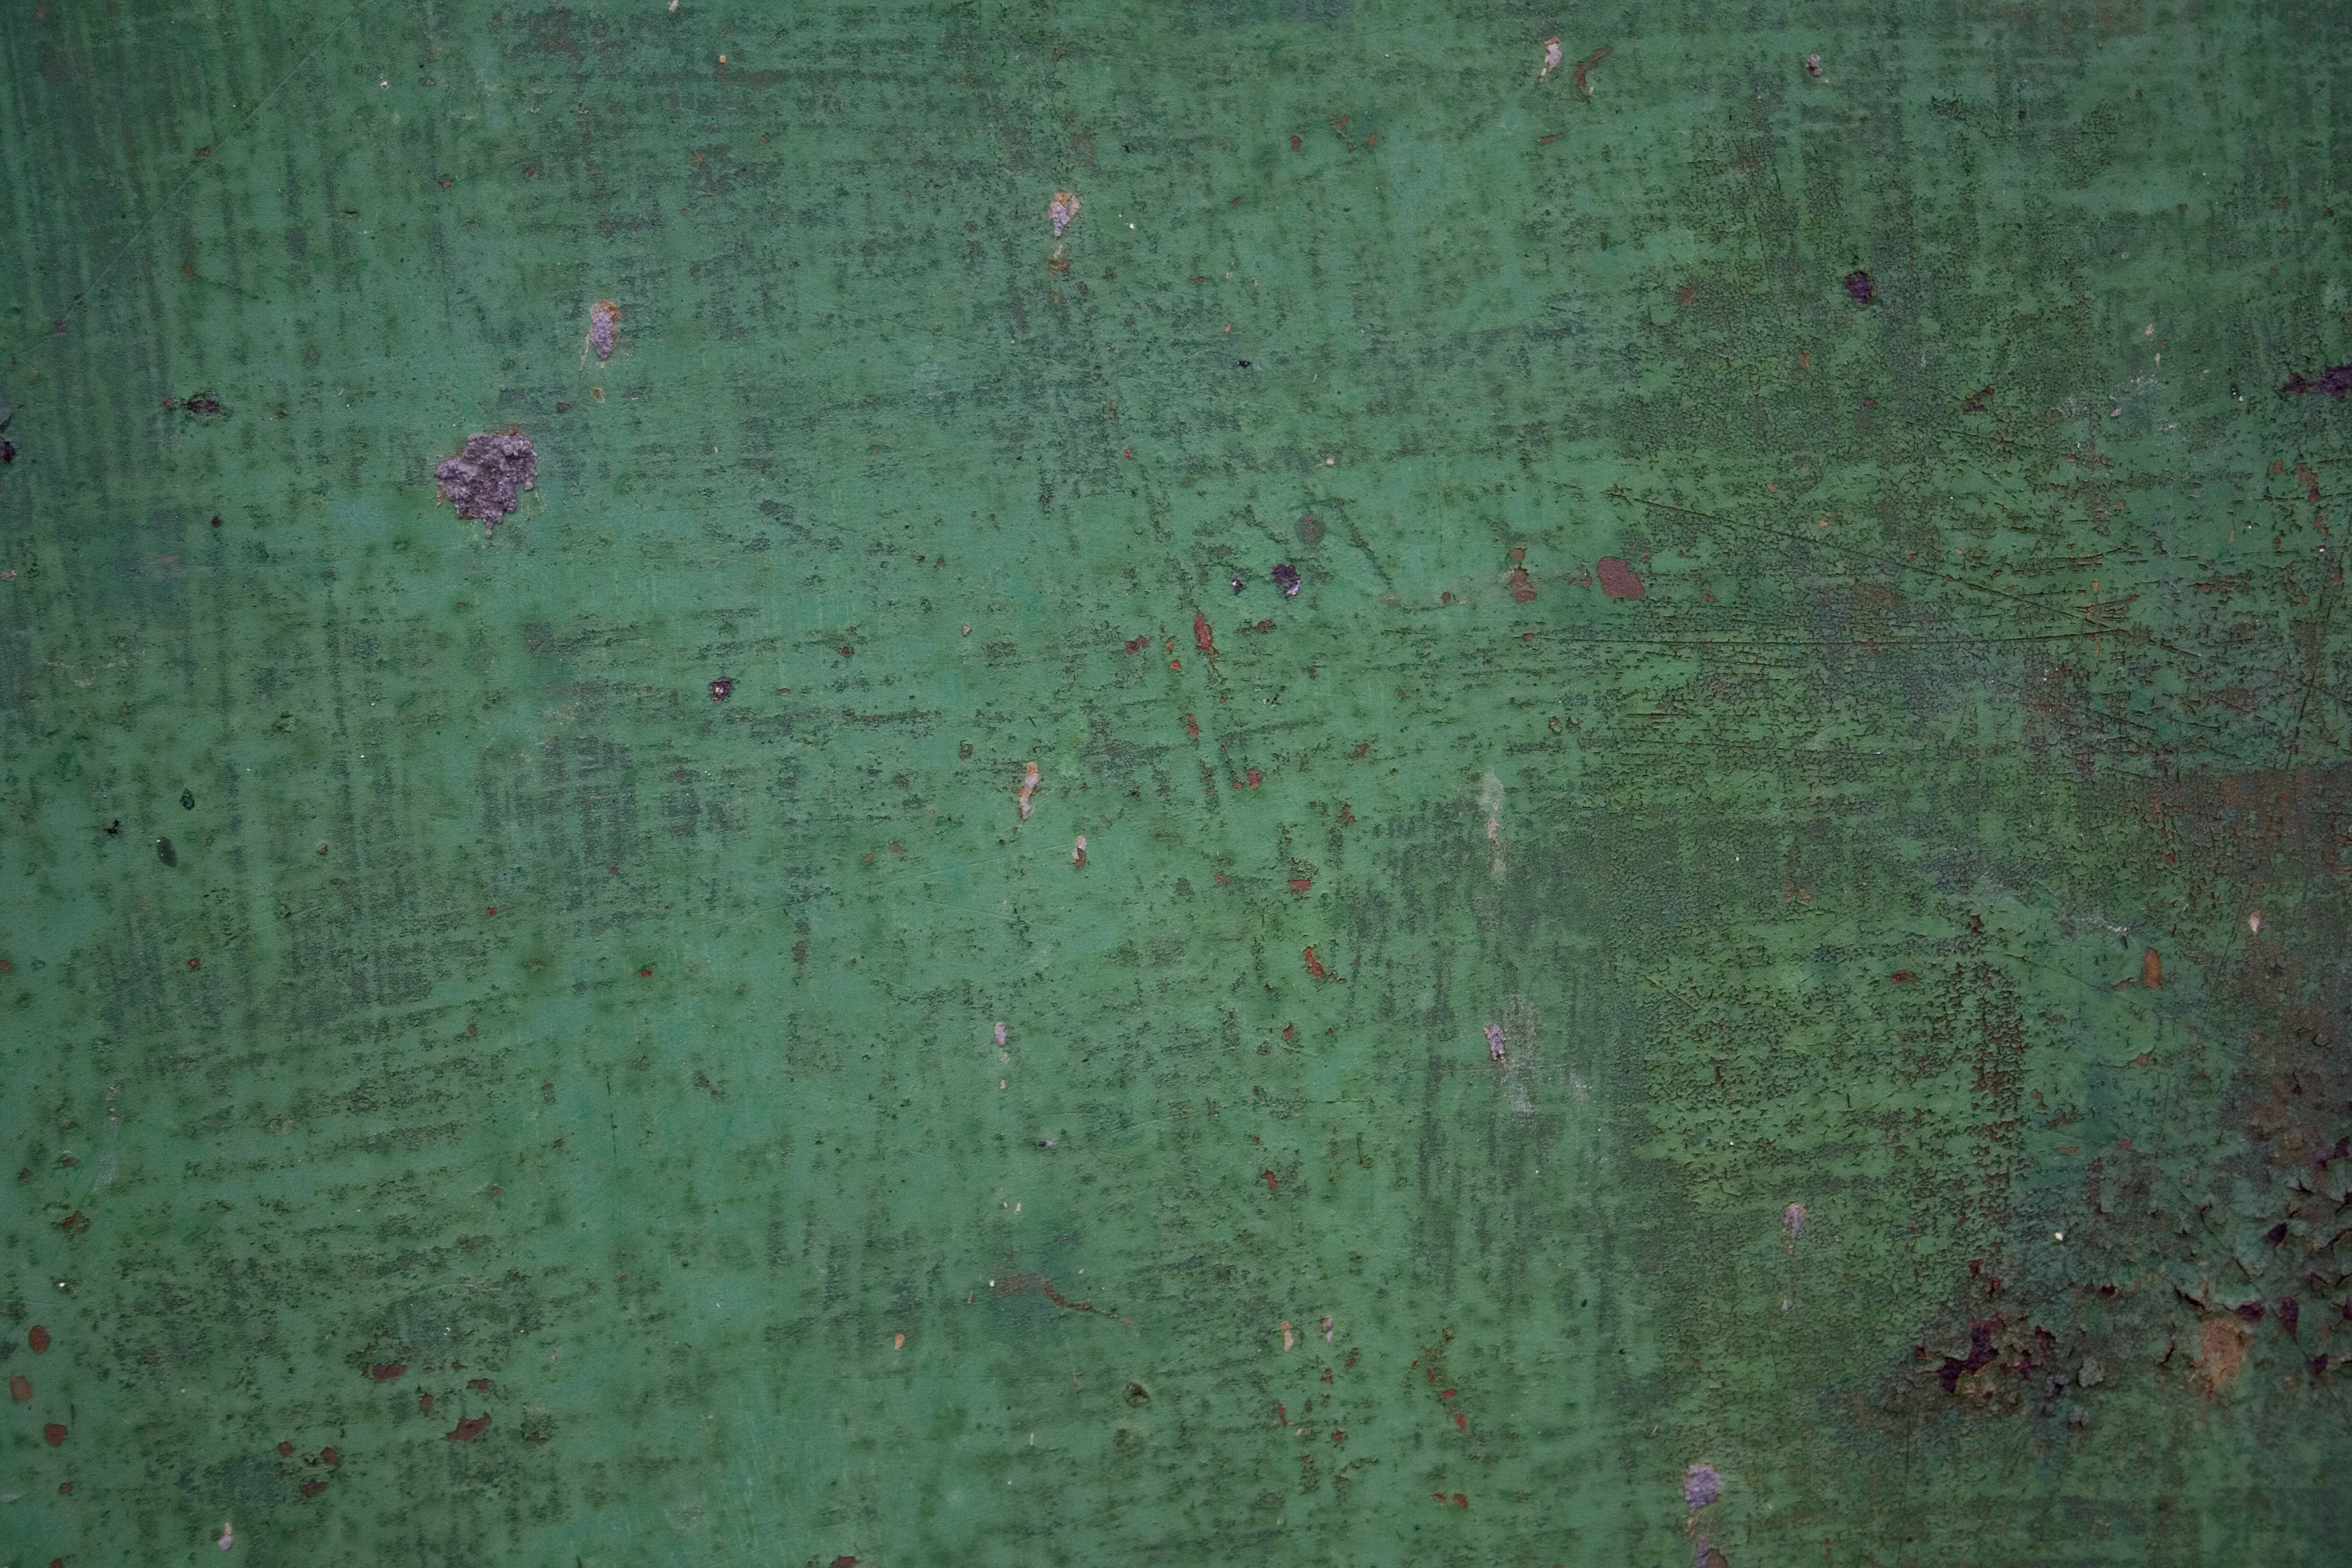 Green | Textures for photoshop free - Part 3